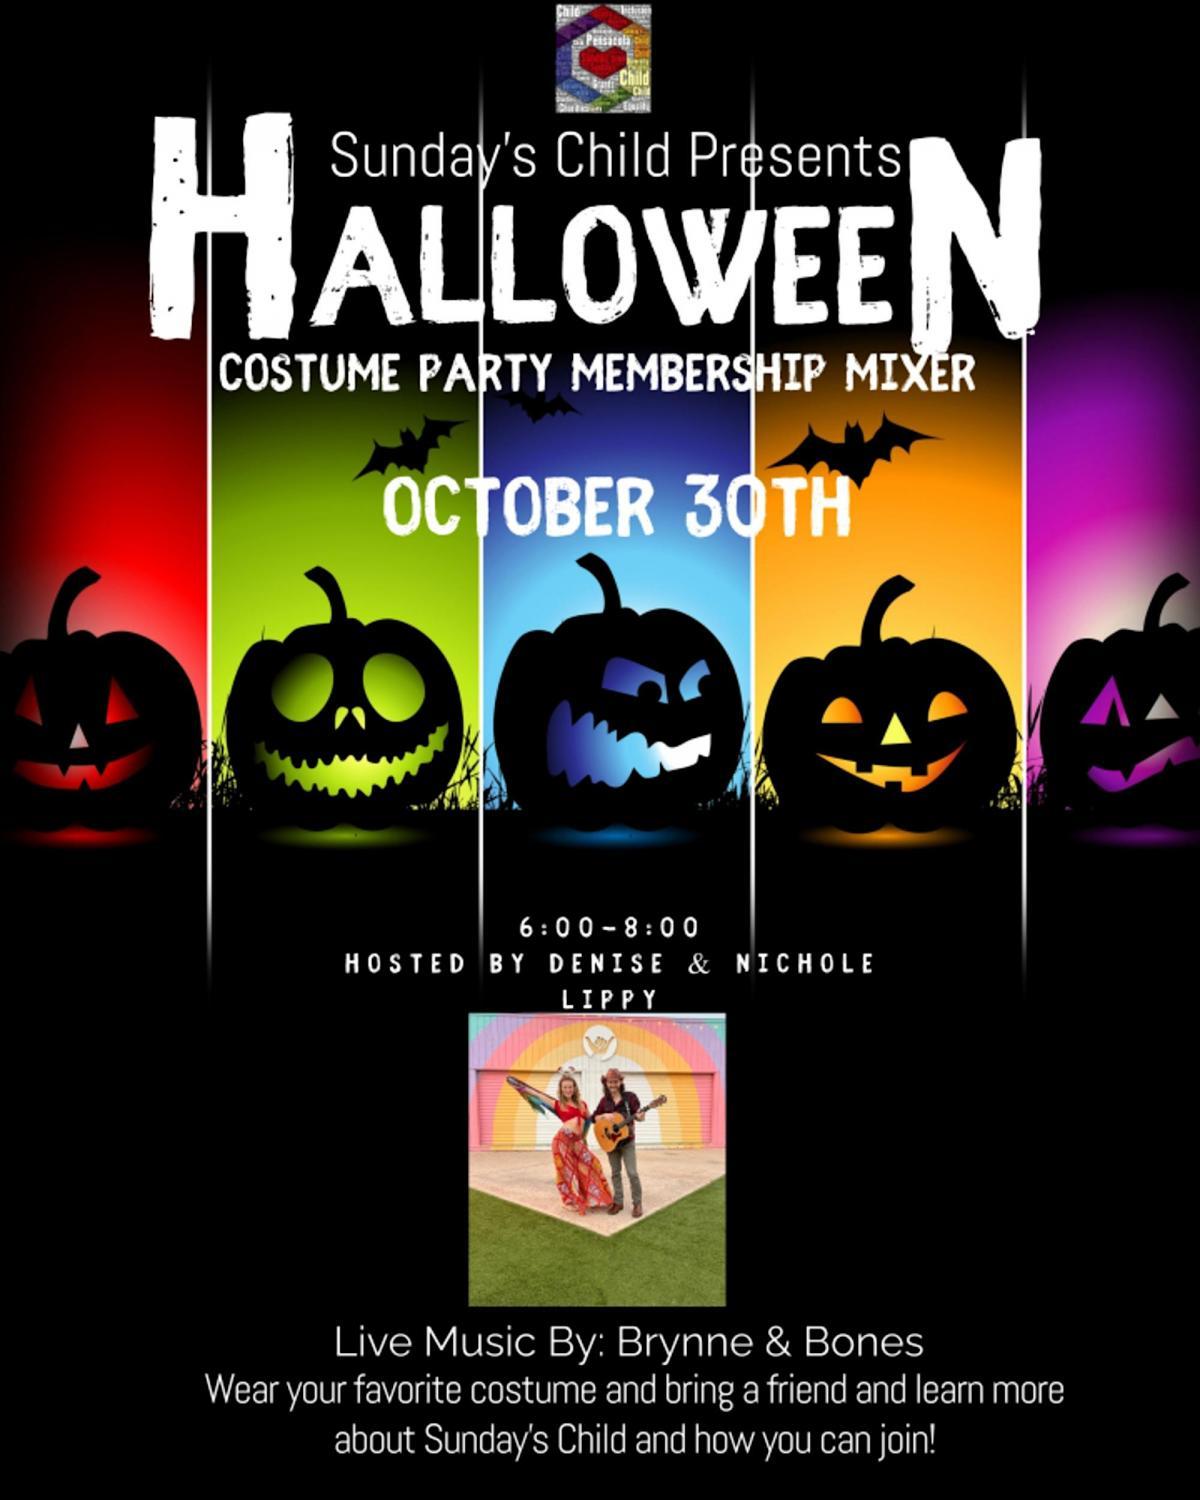 Halloween Costume Party Mixer
Sun Oct 30, 7:00 PM - Sun Oct 30, 7:00 PM
in 10 days